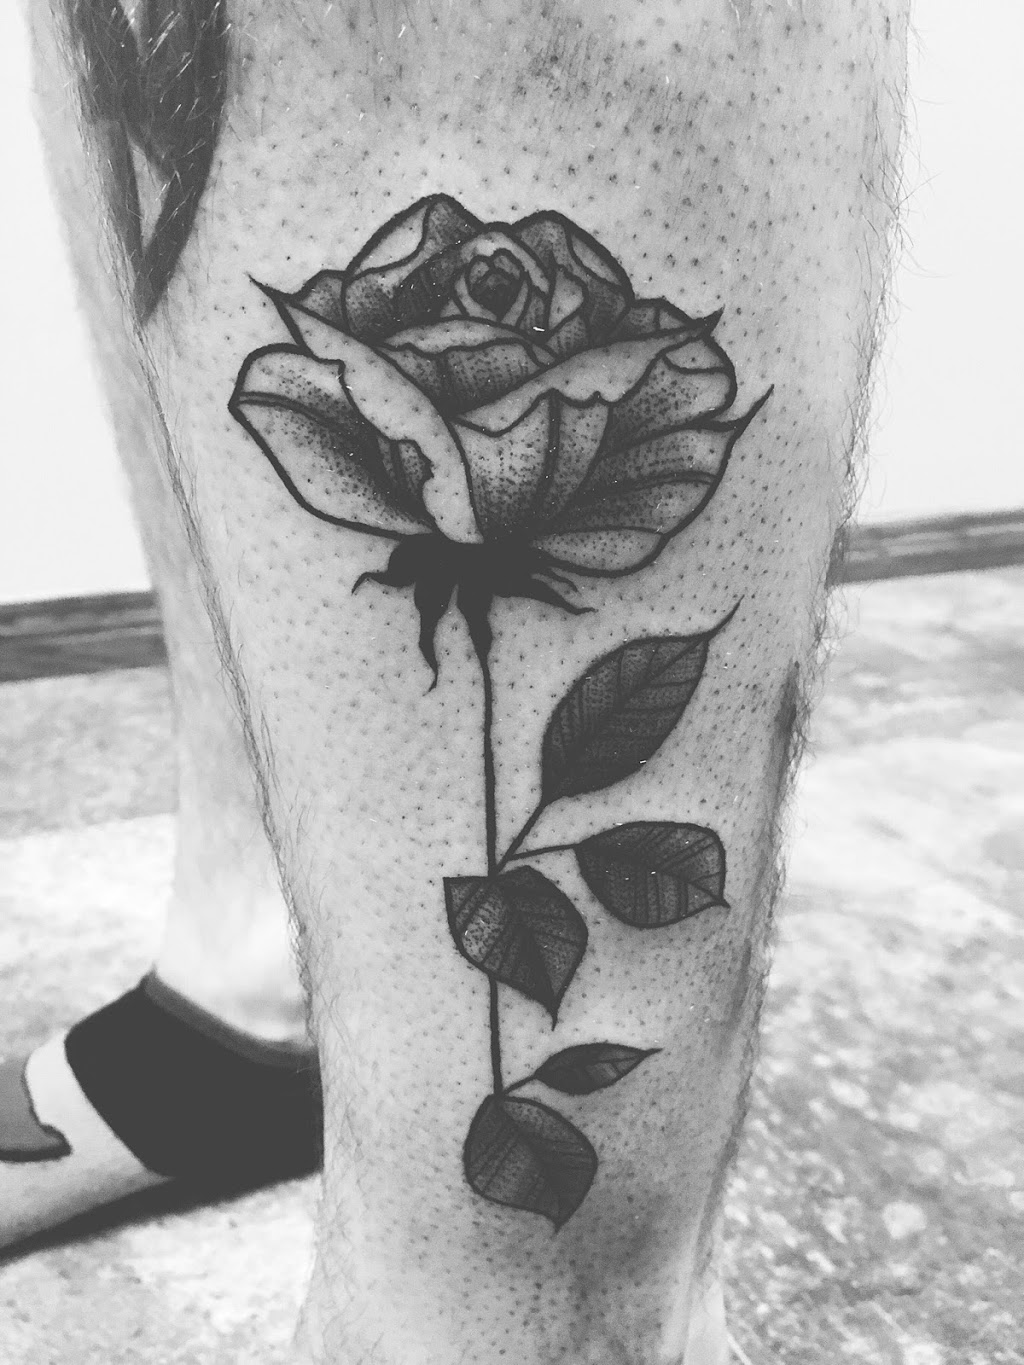 Tattoo Artistry by Jenna | store | 5423 Portage Ave, Headingley, MB R4H 1H8, Canada | 2049818666 OR +1 204-981-8666